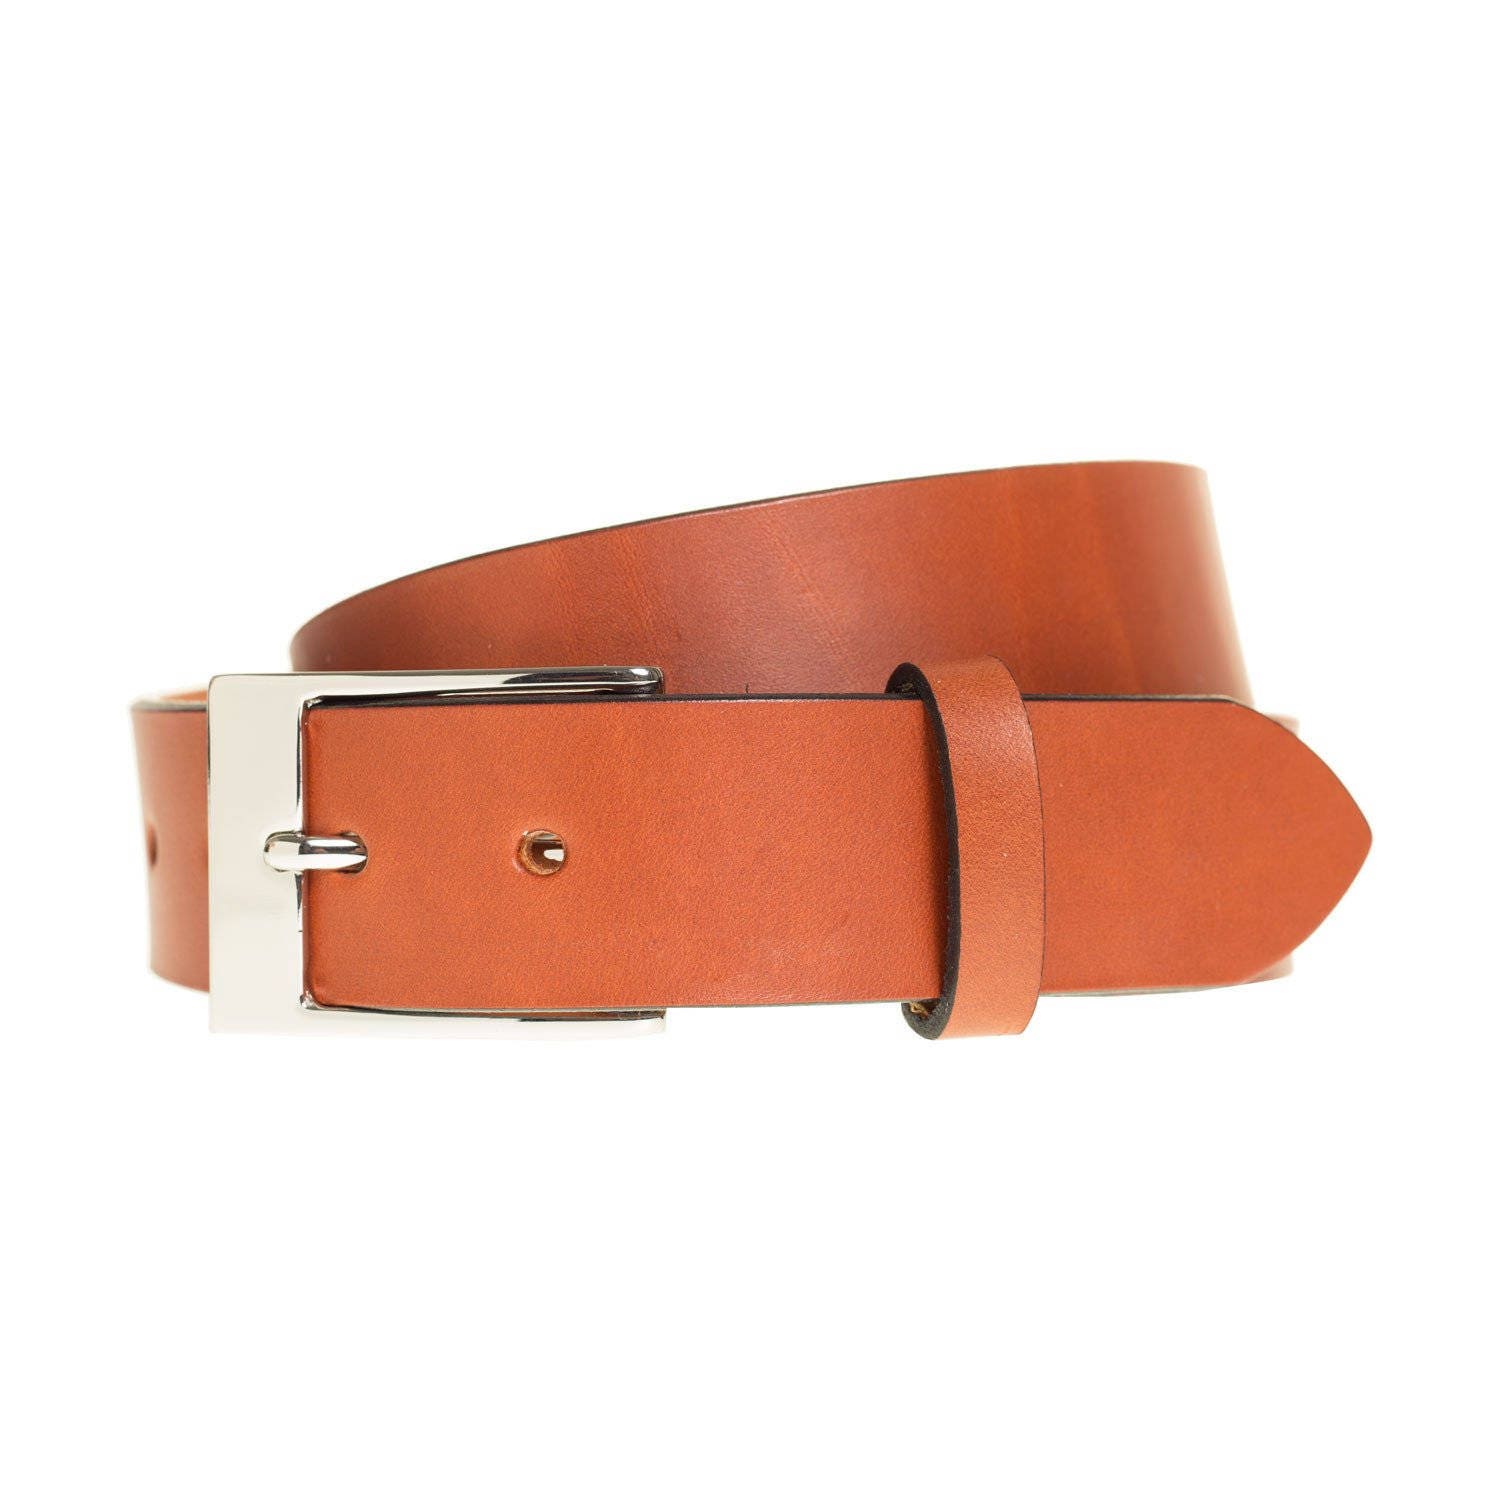 Chestnut Brown Leather Belts Made in America Eco Tanned